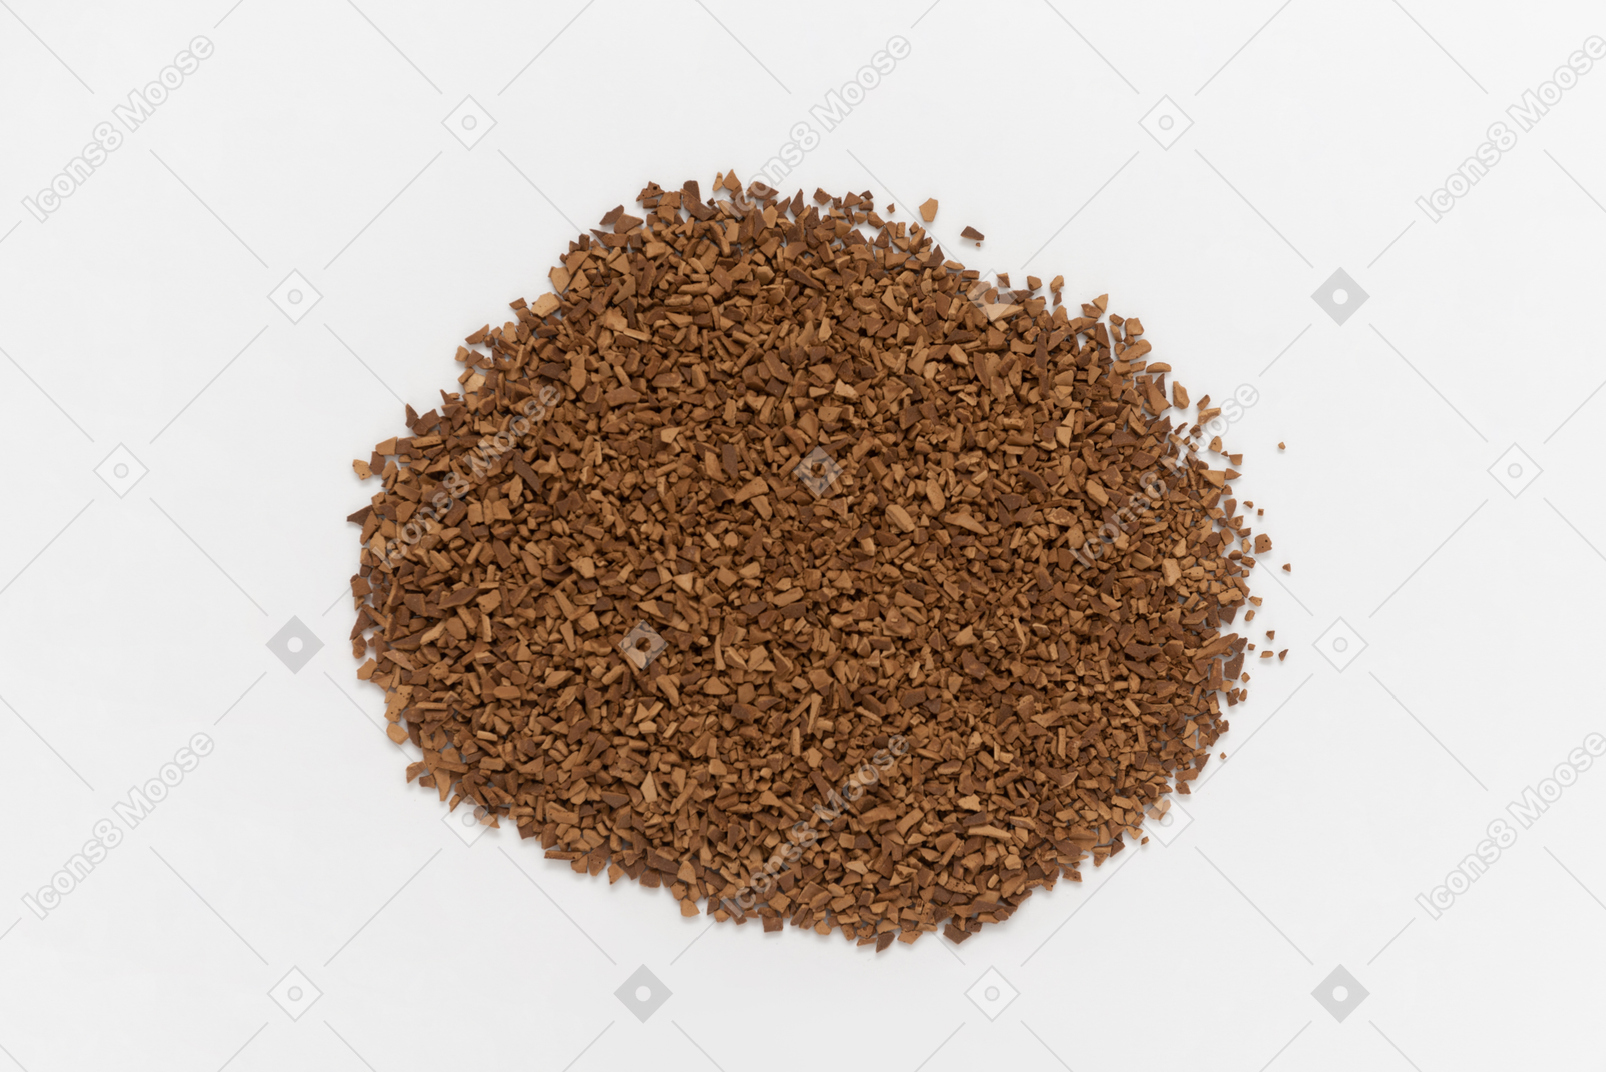 Grounded instant coffee on white background